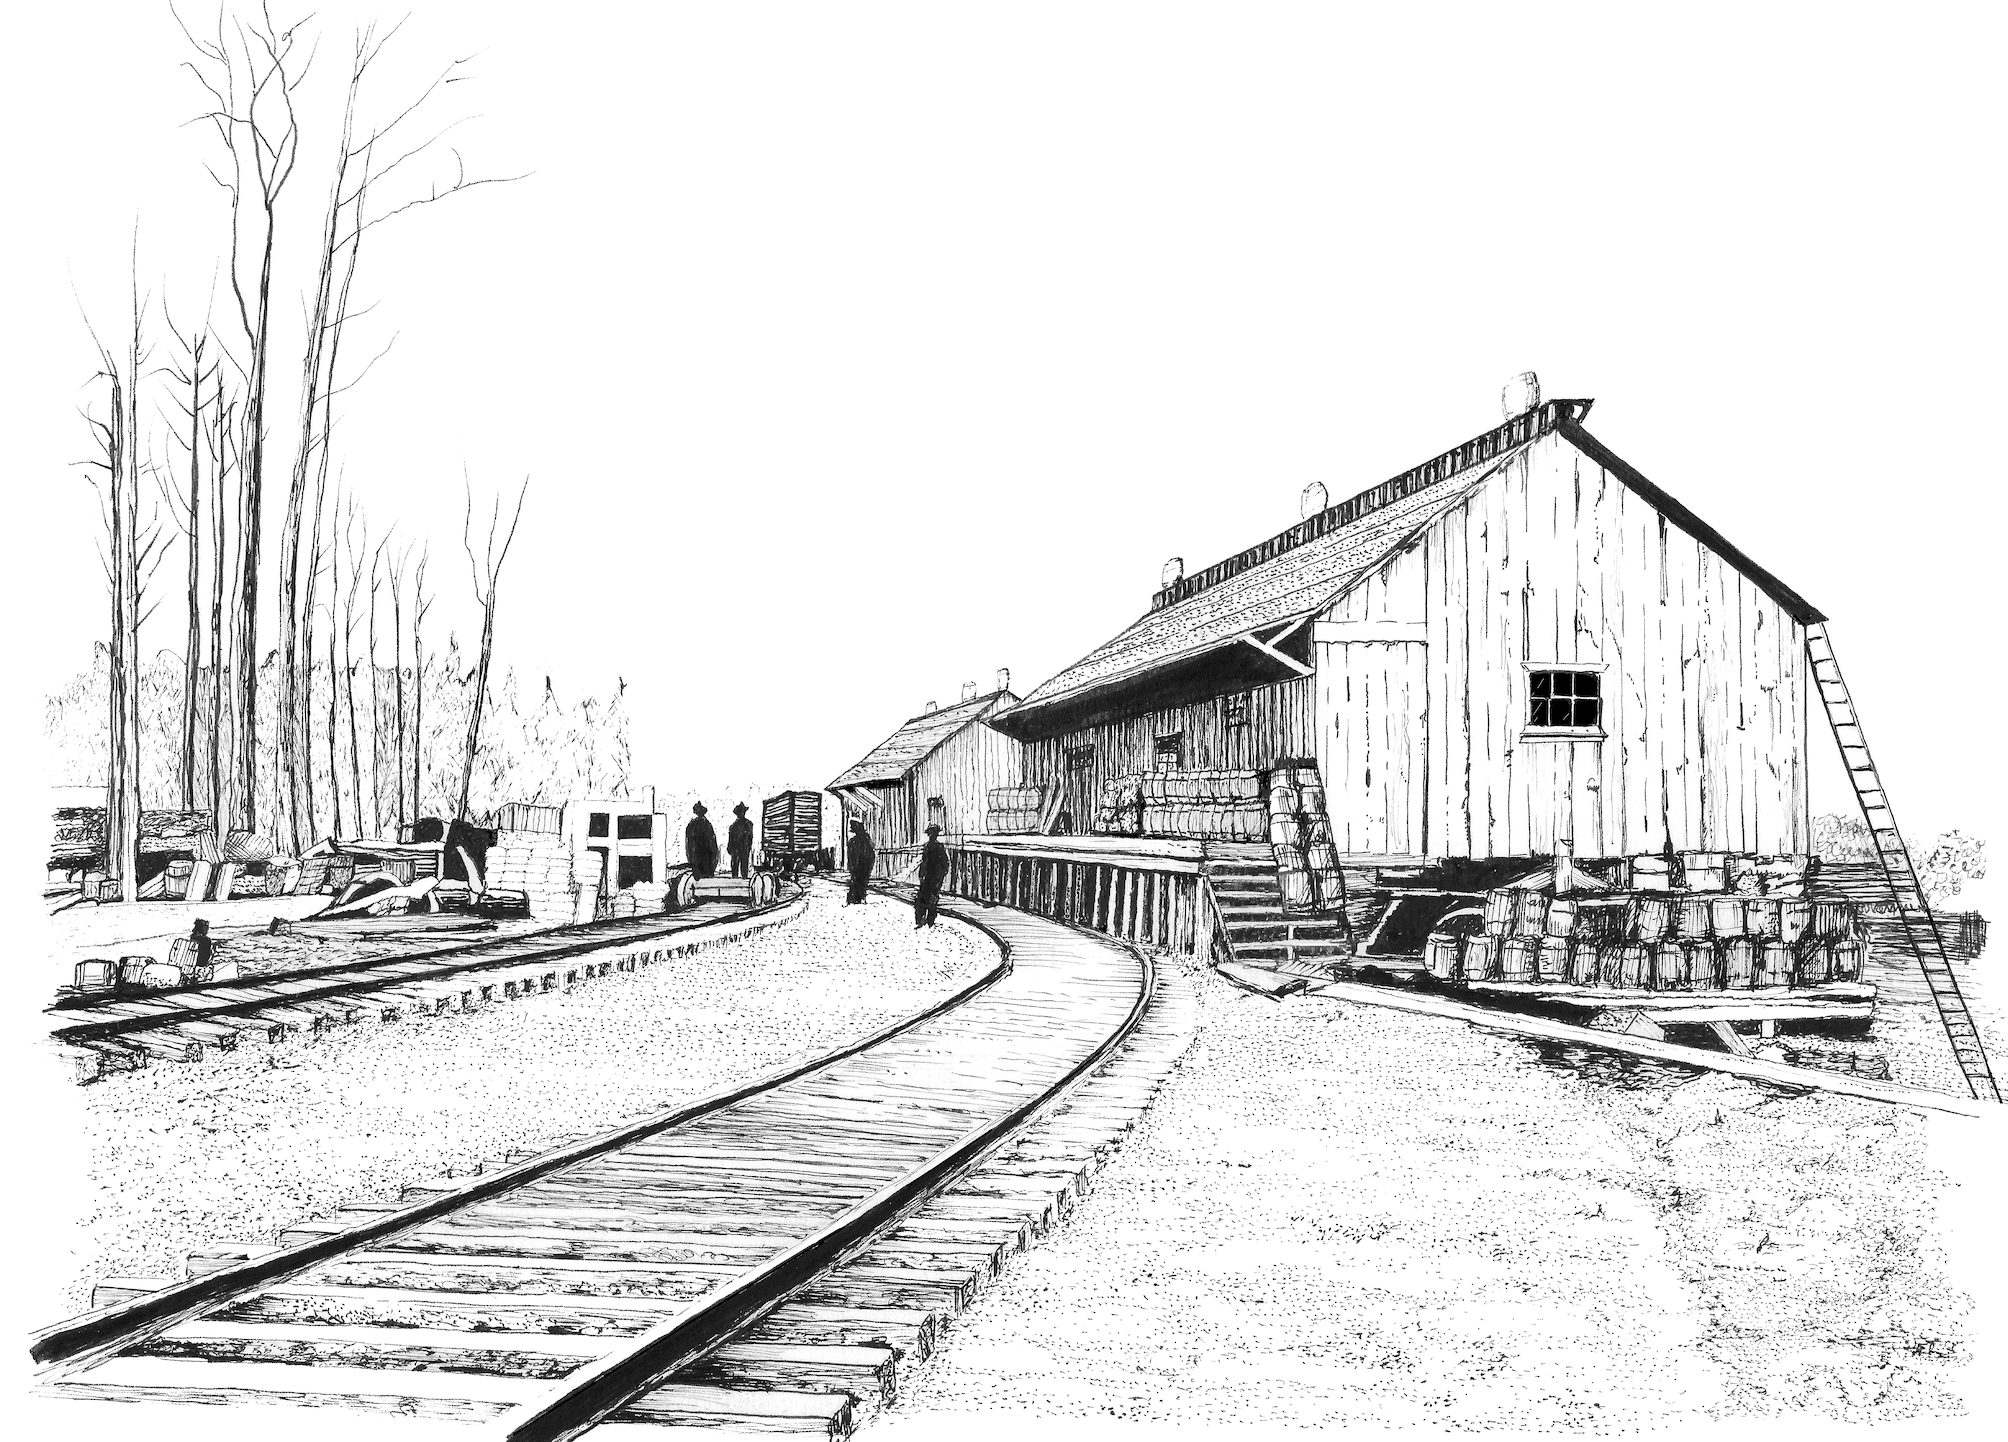 The steamships brought supplies into Seward and sent products to the Lower 48. The railroad moved and stored the goods in warehouses.